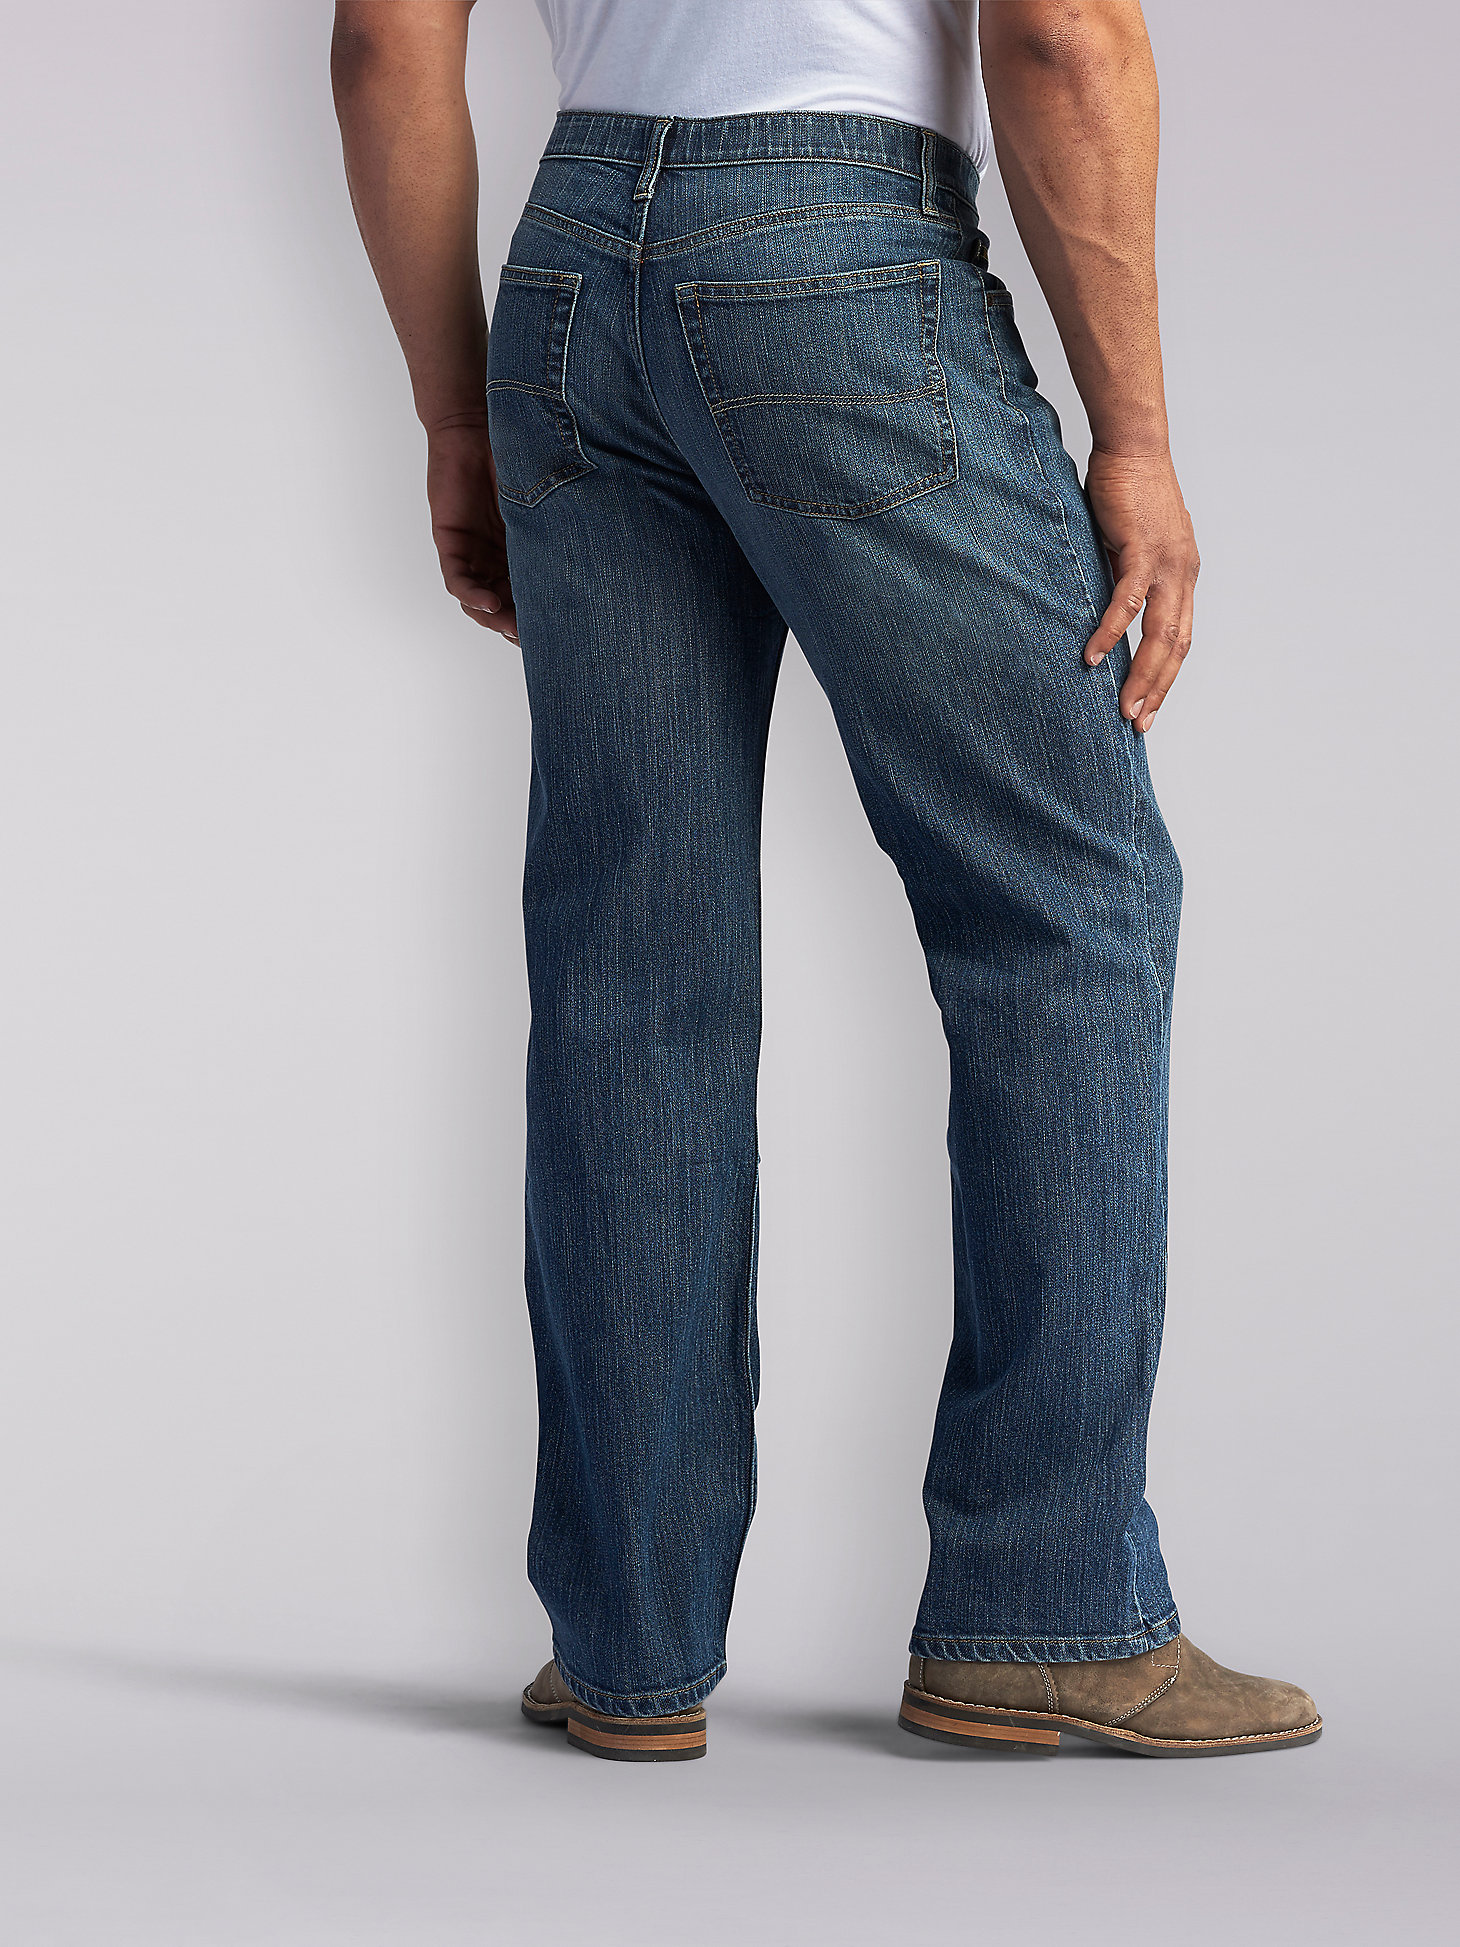 Men’s Premium Select Relaxed Fit Straight Leg Jean (Big&Tall) in Thatch